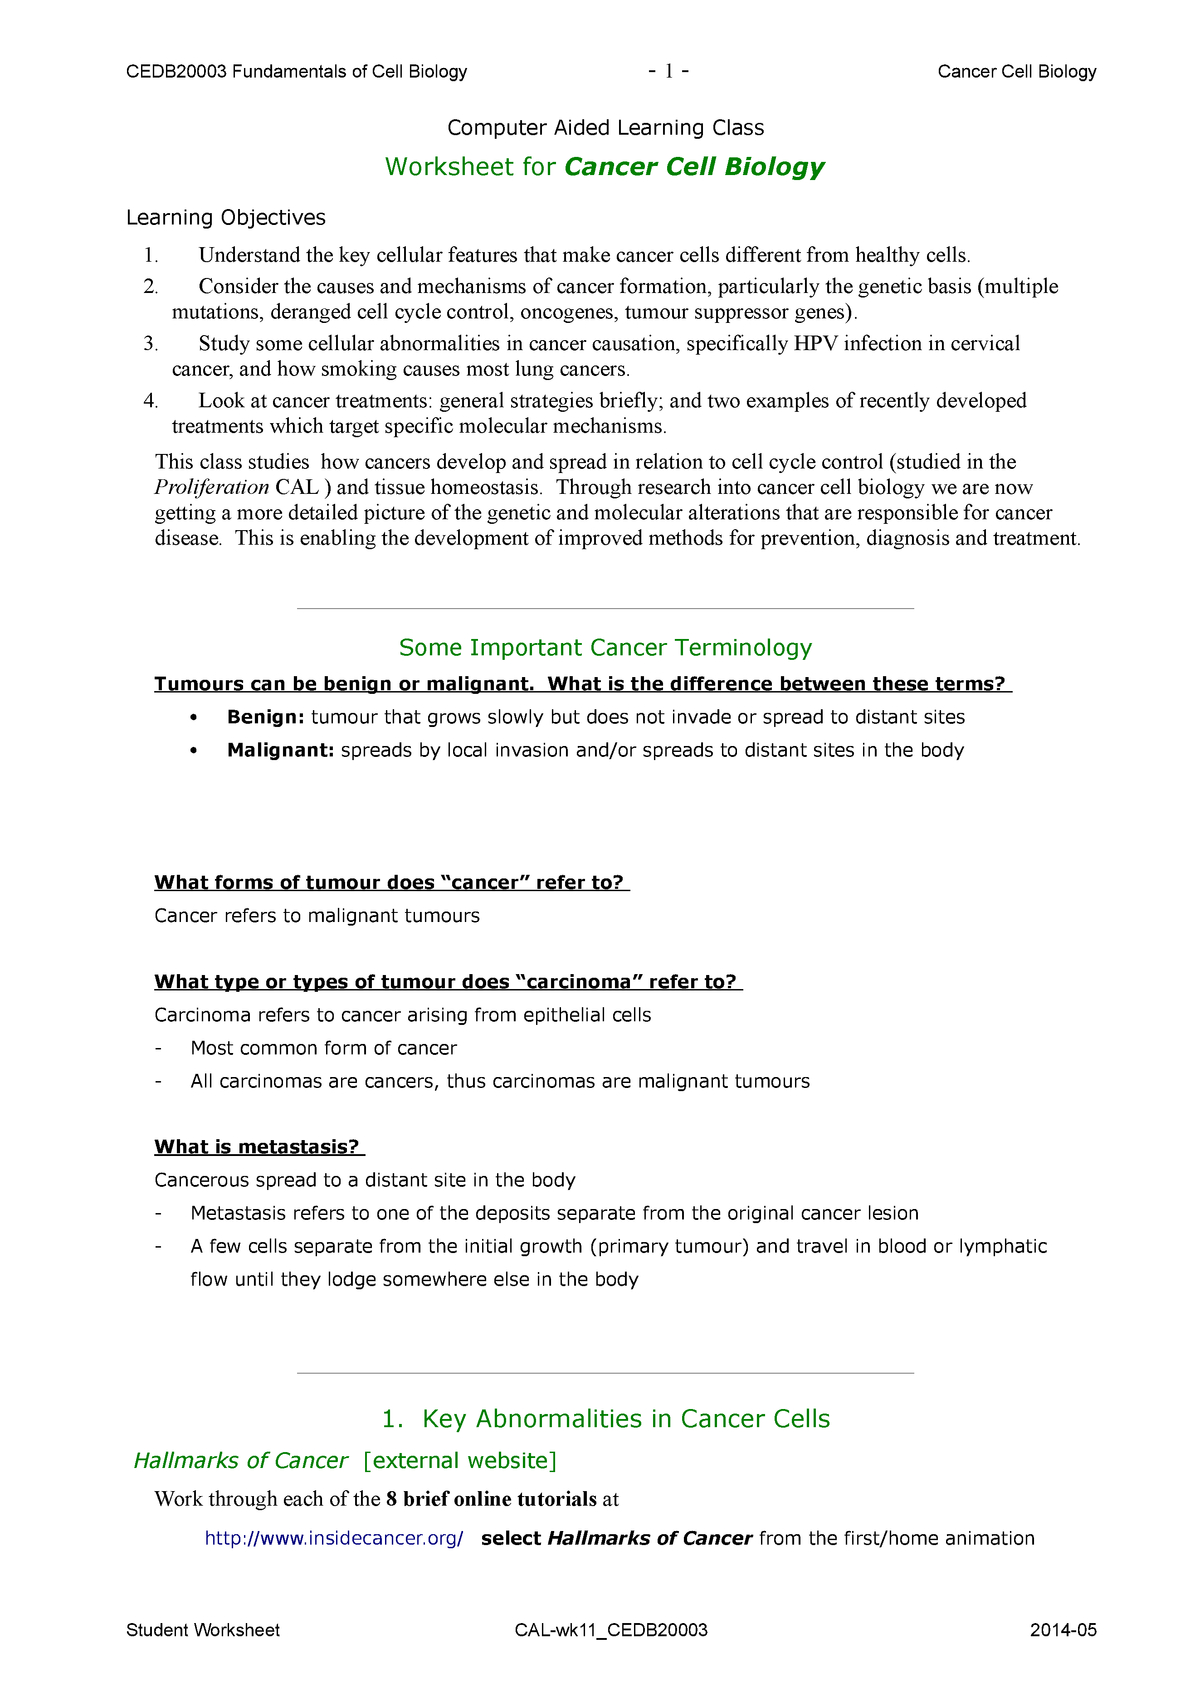 Immortal Cancer Cells Worksheet Answers